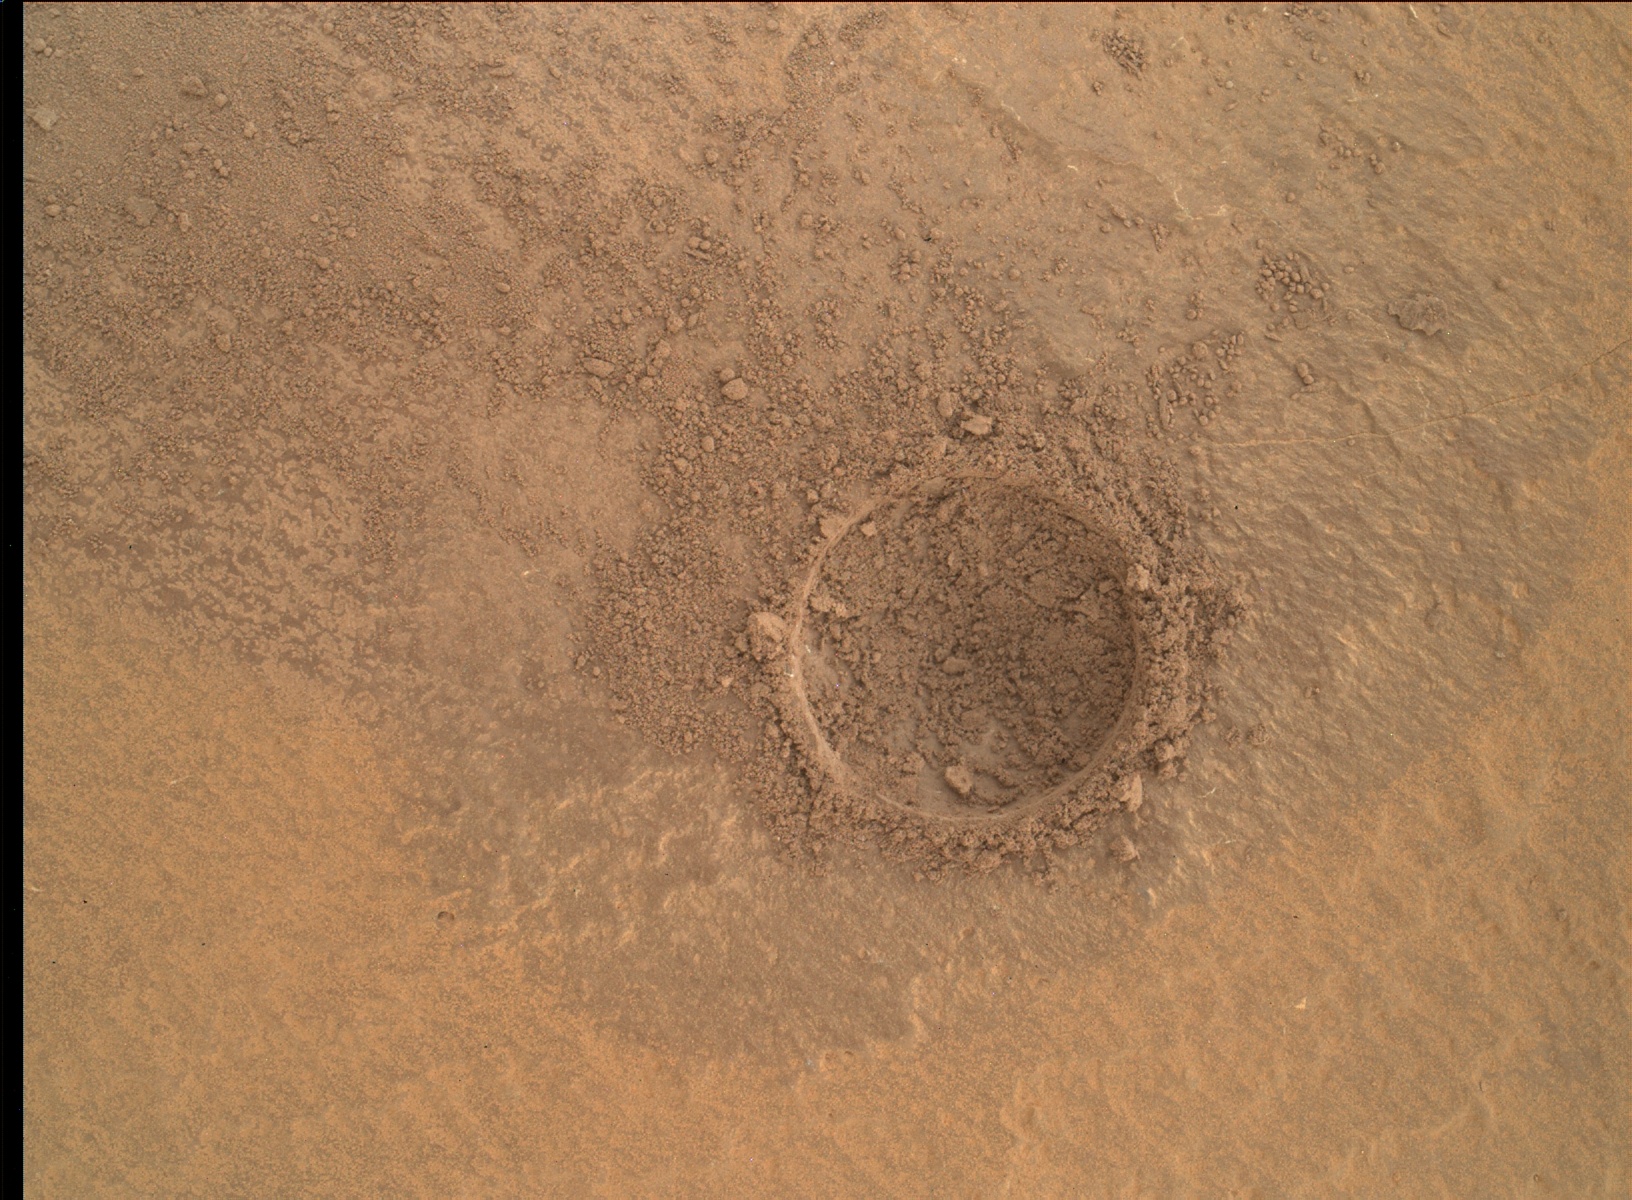 Nasa's Mars rover Curiosity acquired this image using its Mars Hand Lens Imager (MAHLI) on Sol 1420